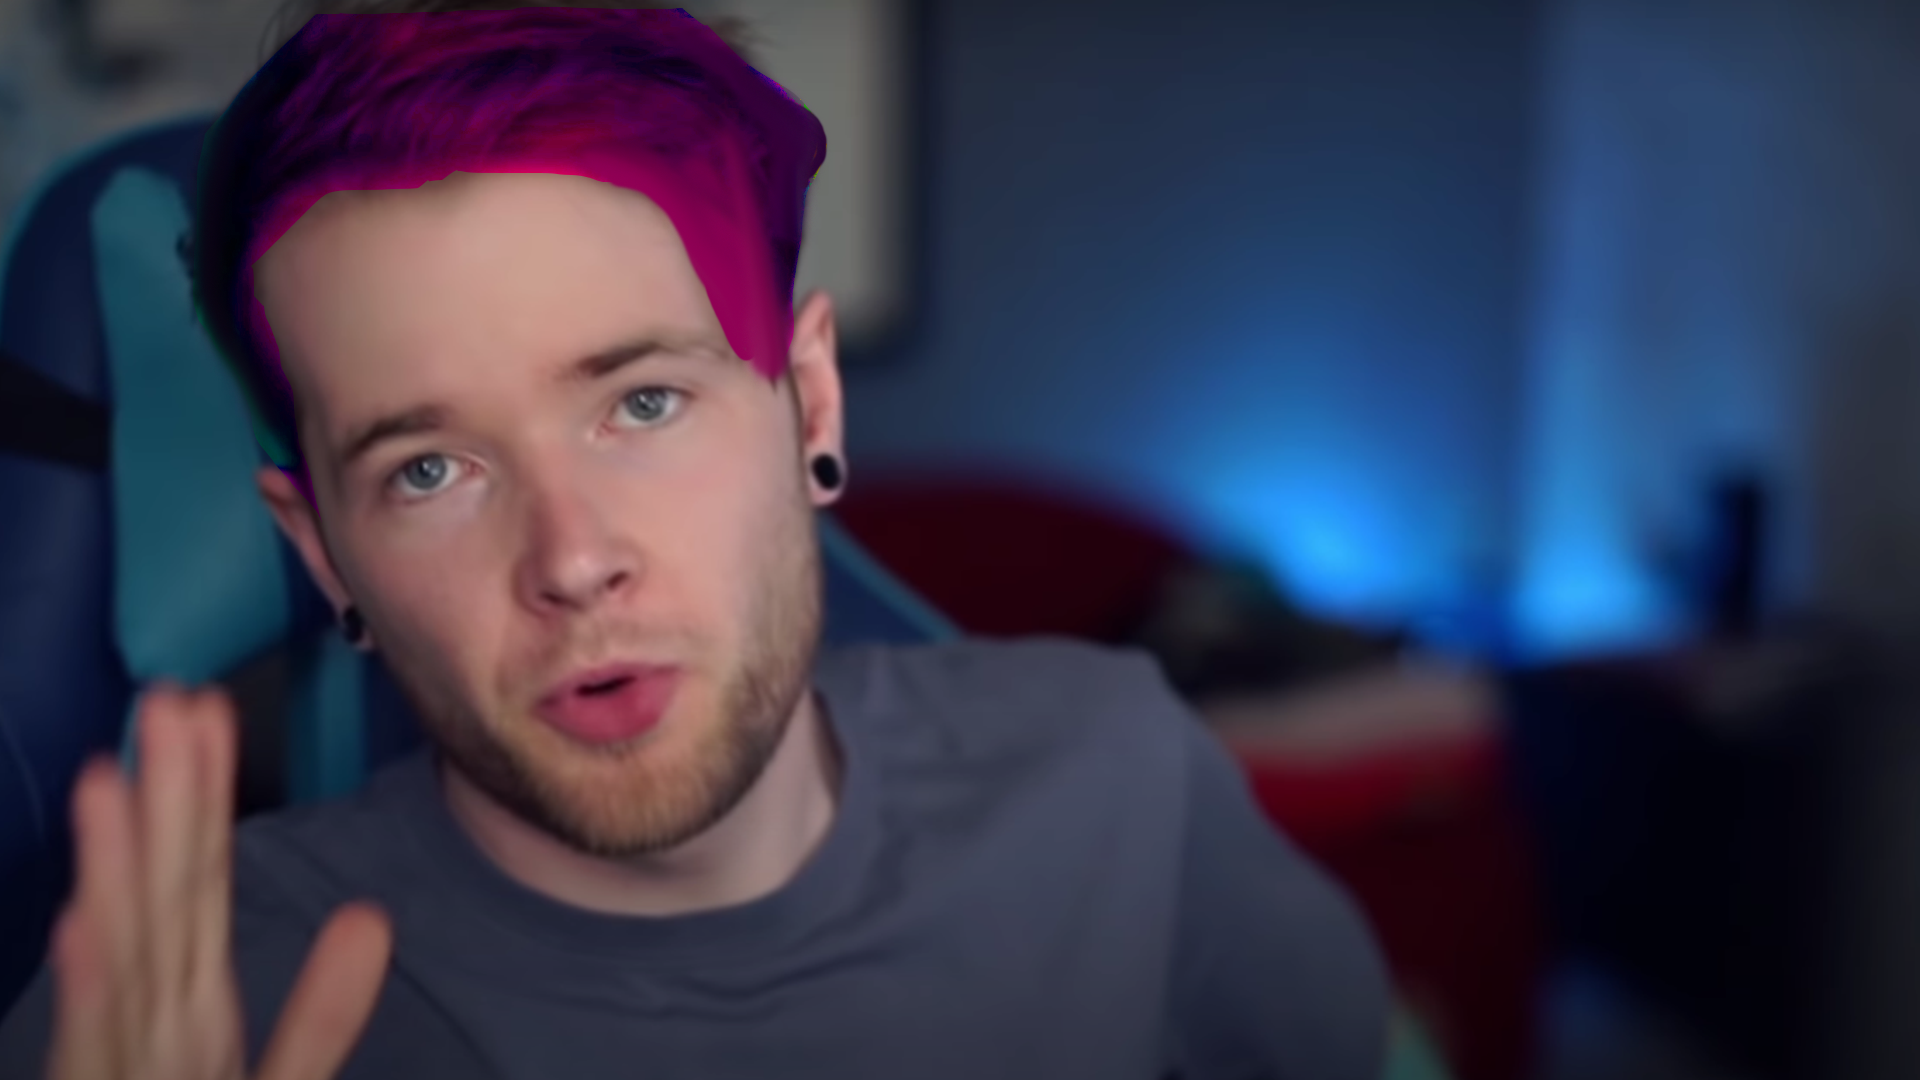 10. Dantdm's Blue and Pink Hair Inspiration - wide 2